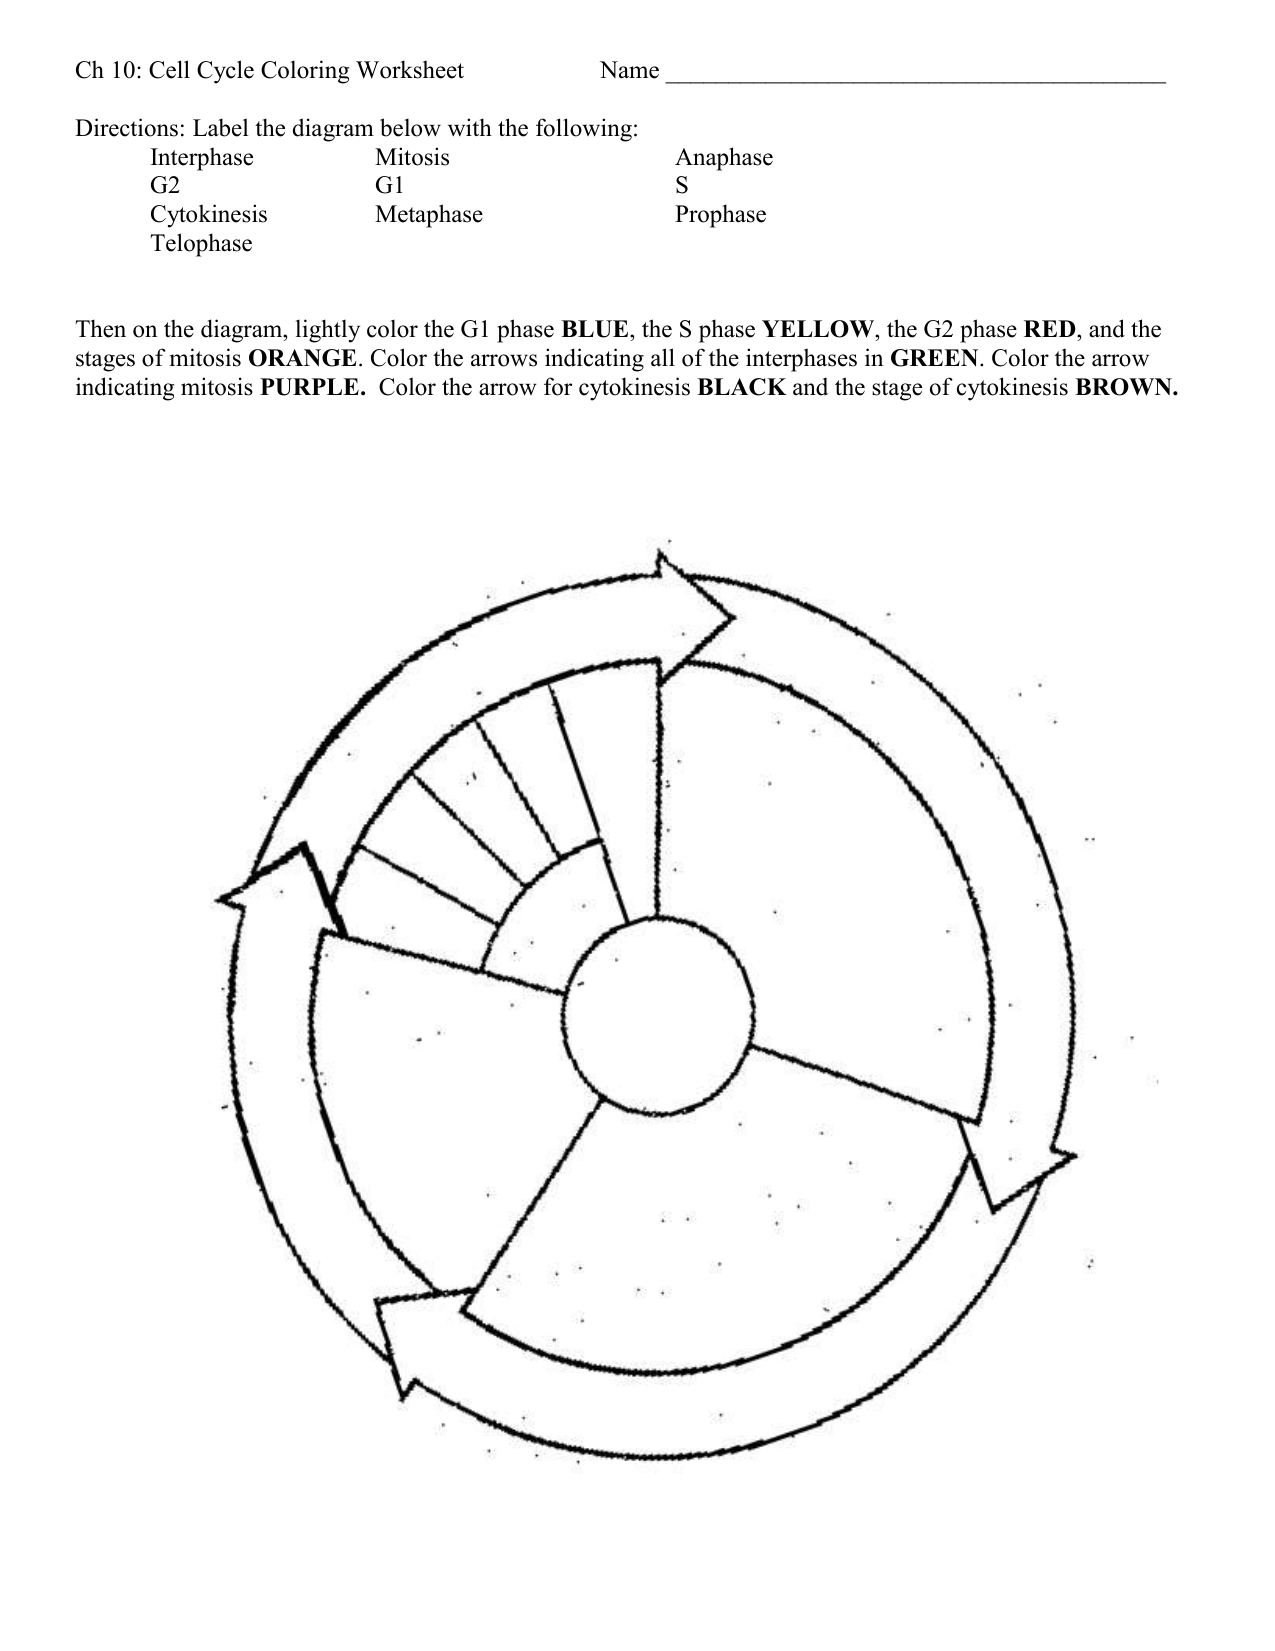 cell cycle coloring Pertaining To Cell Cycle Coloring Worksheet